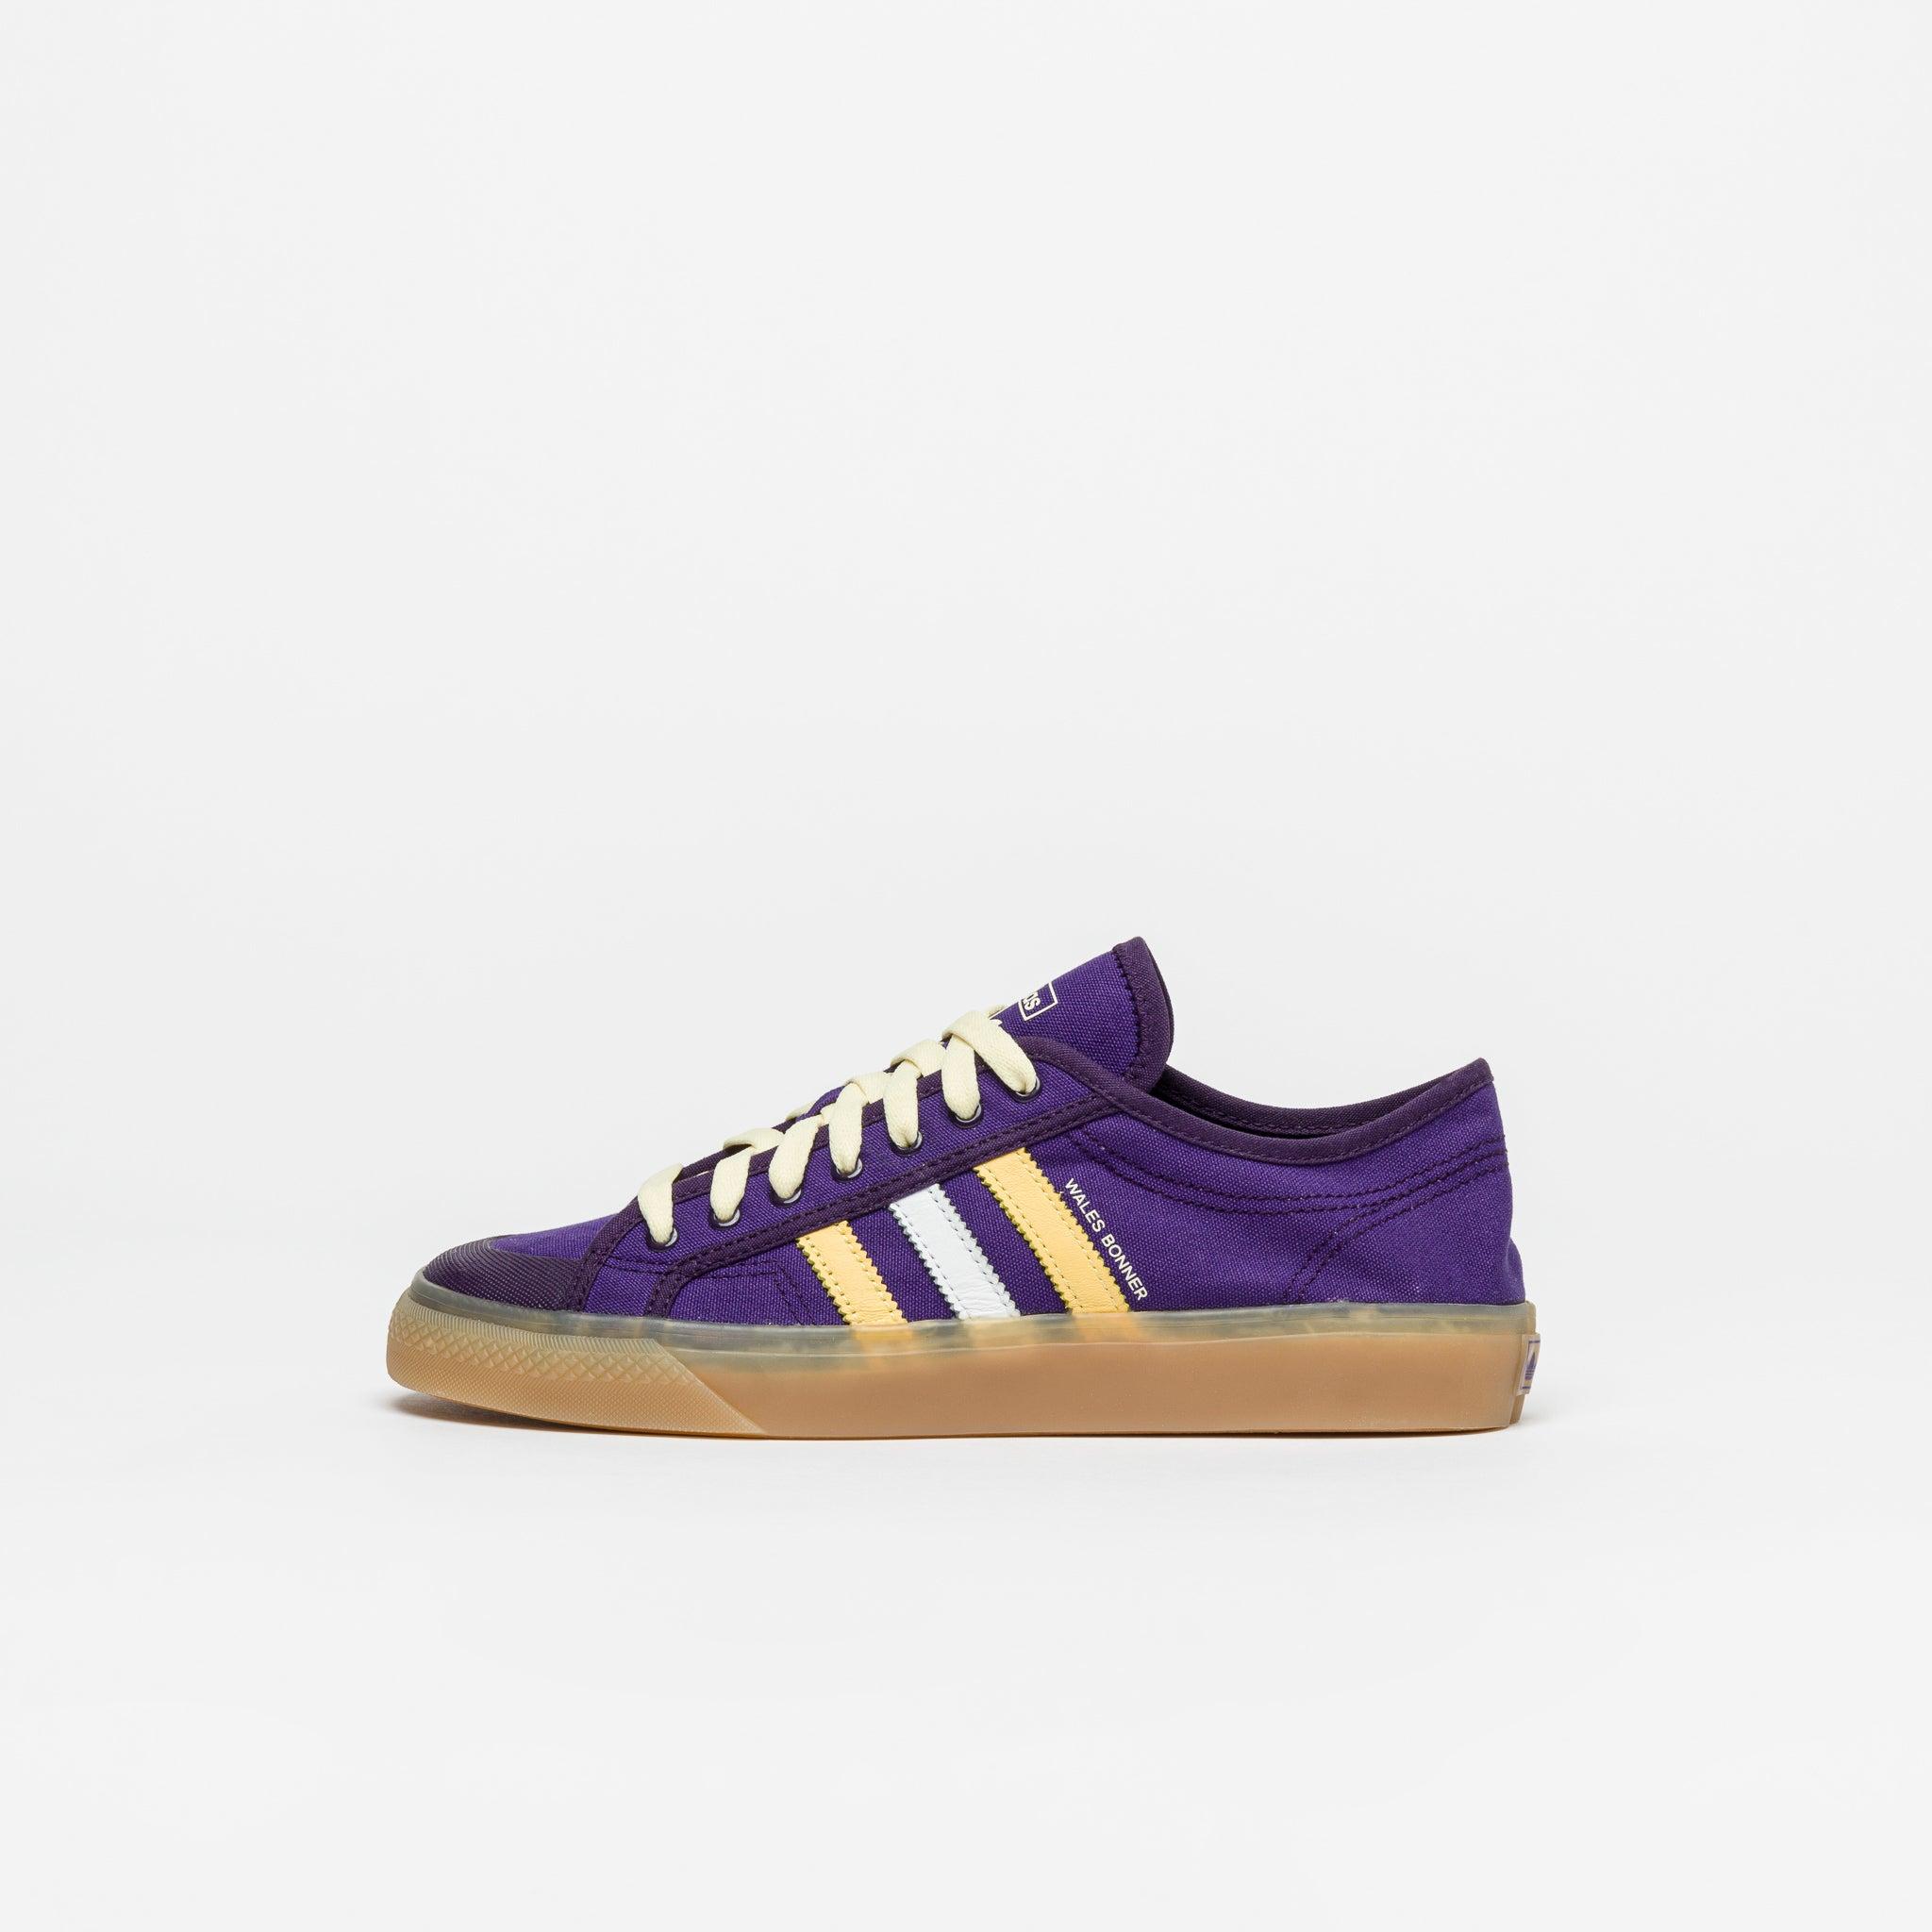 adidas Canvas Wales Bonner Nizza Lo in Purple / Yellow / Gold 